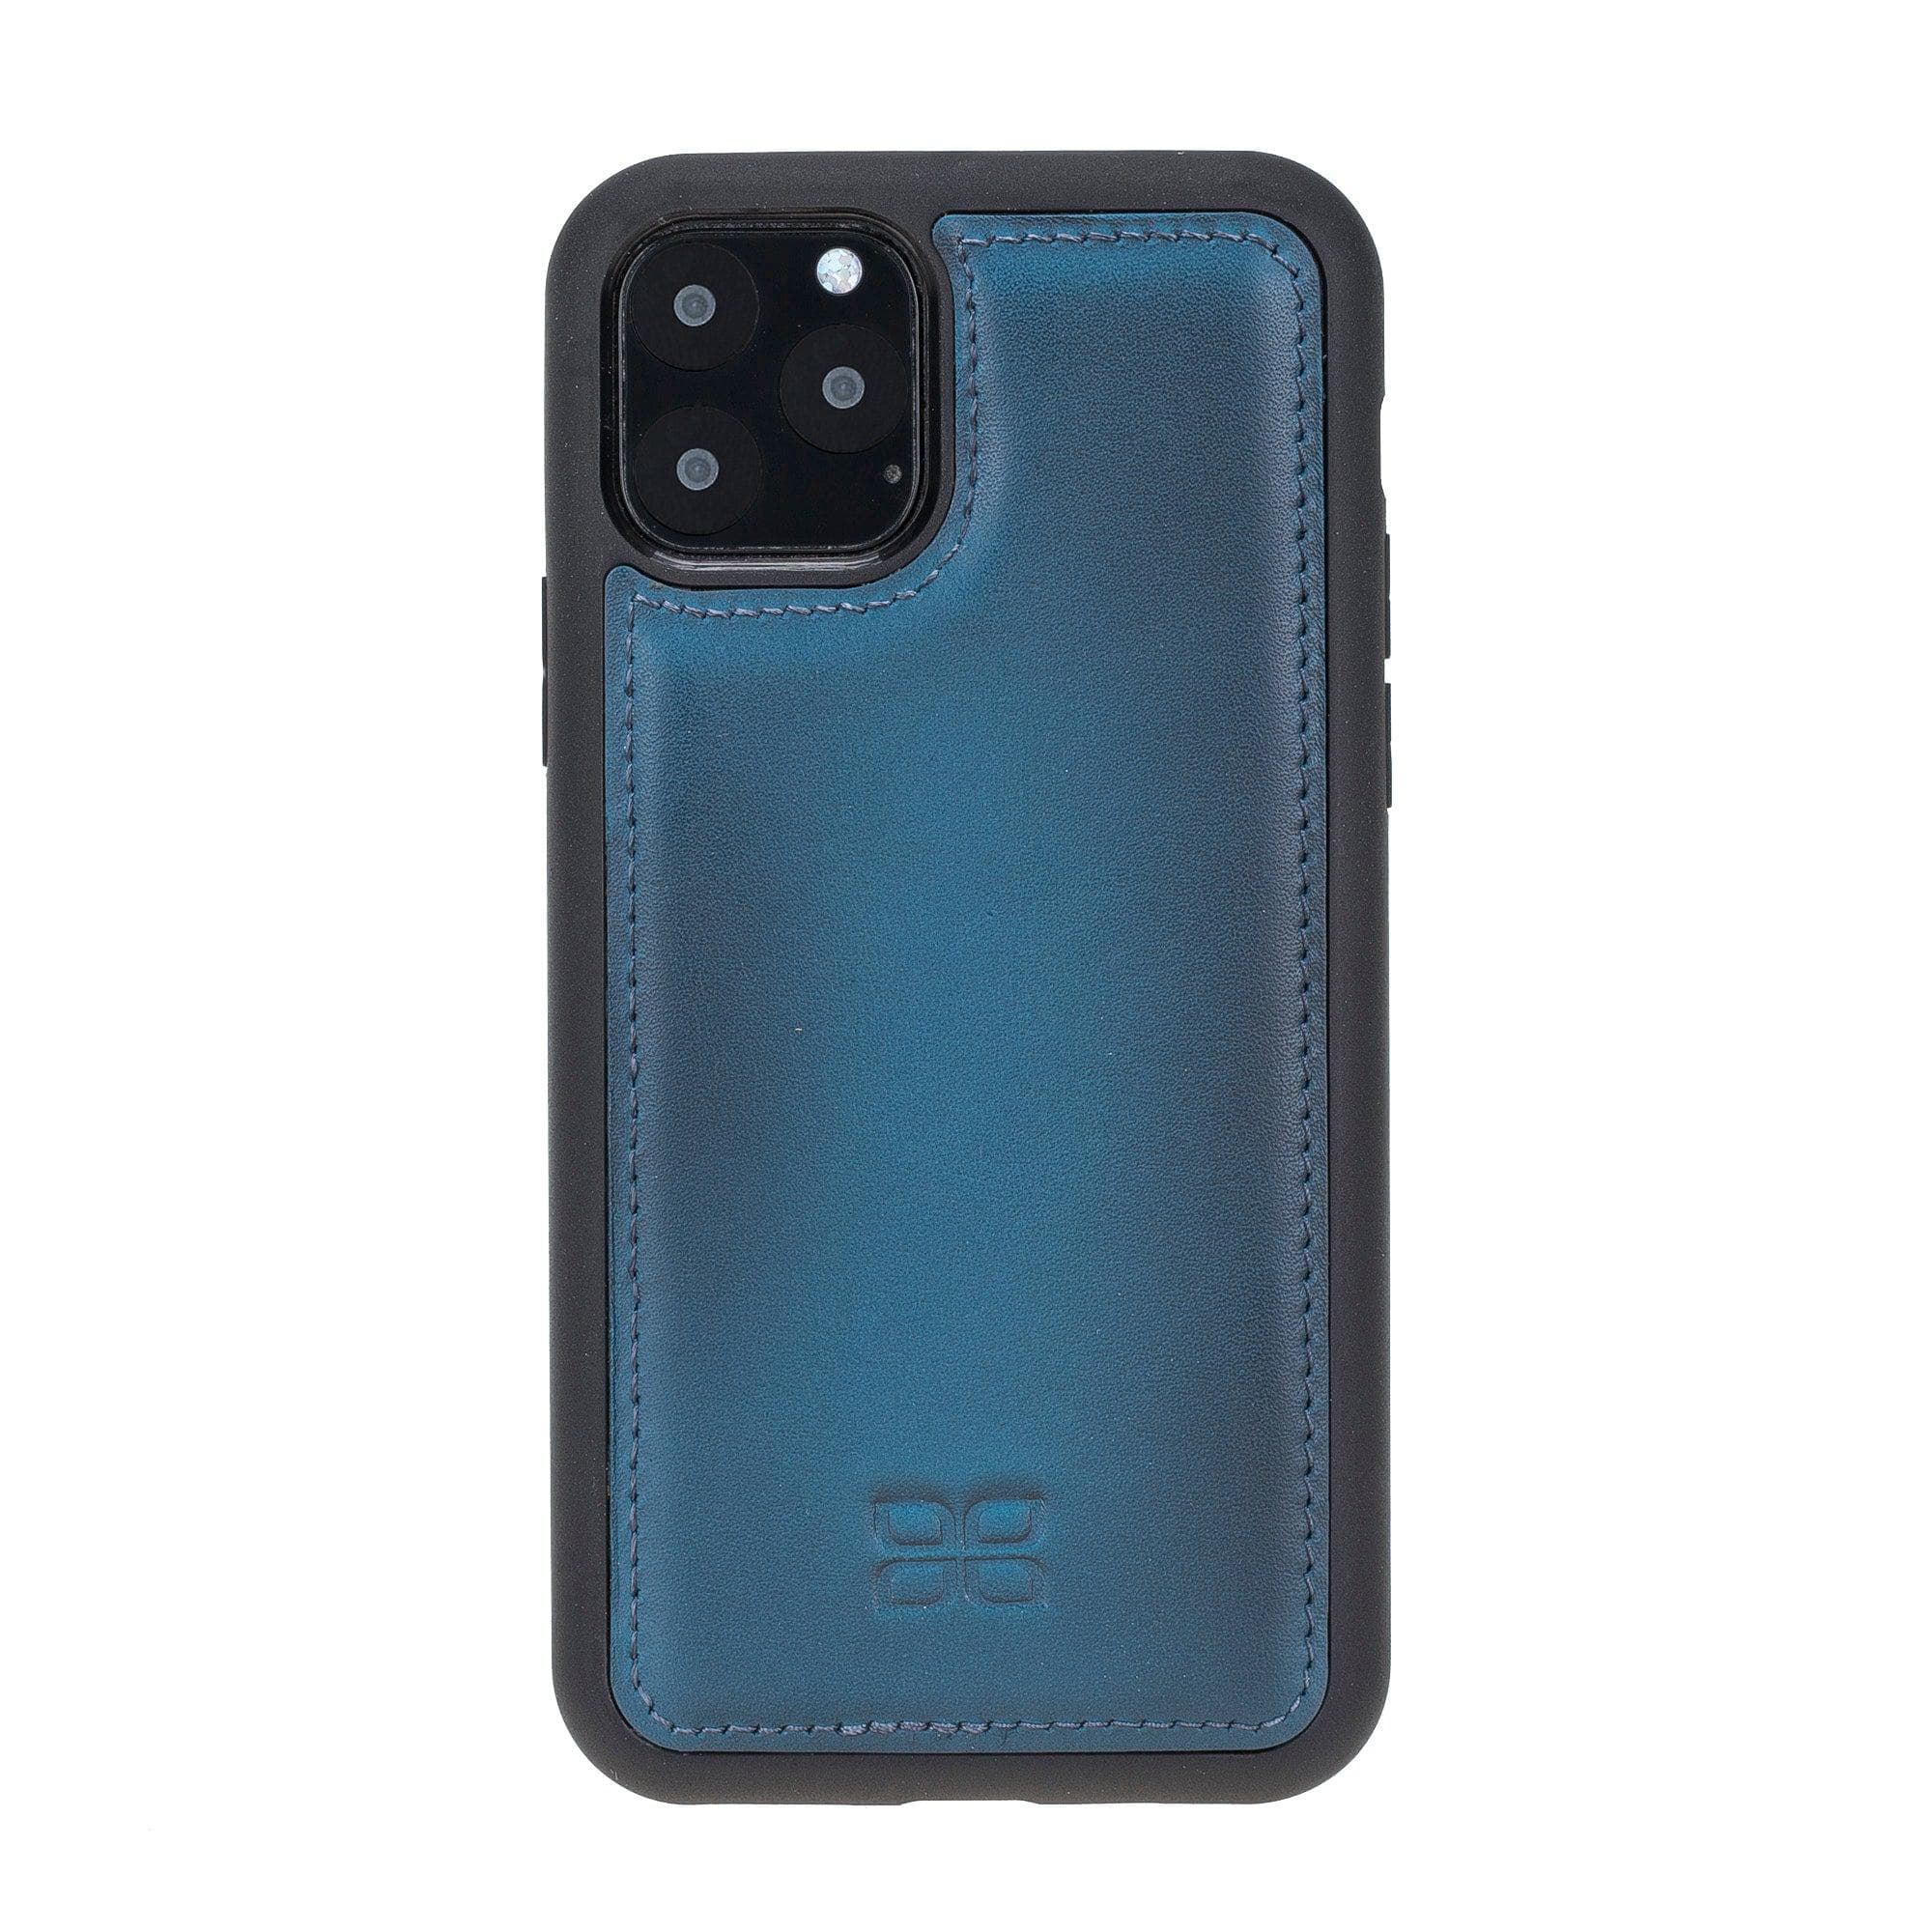 Flex Cover Leather Back Cover Case for Apple iPhone 11 Series iPhone 11 Pro 5.8" / Blue Bouletta LTD